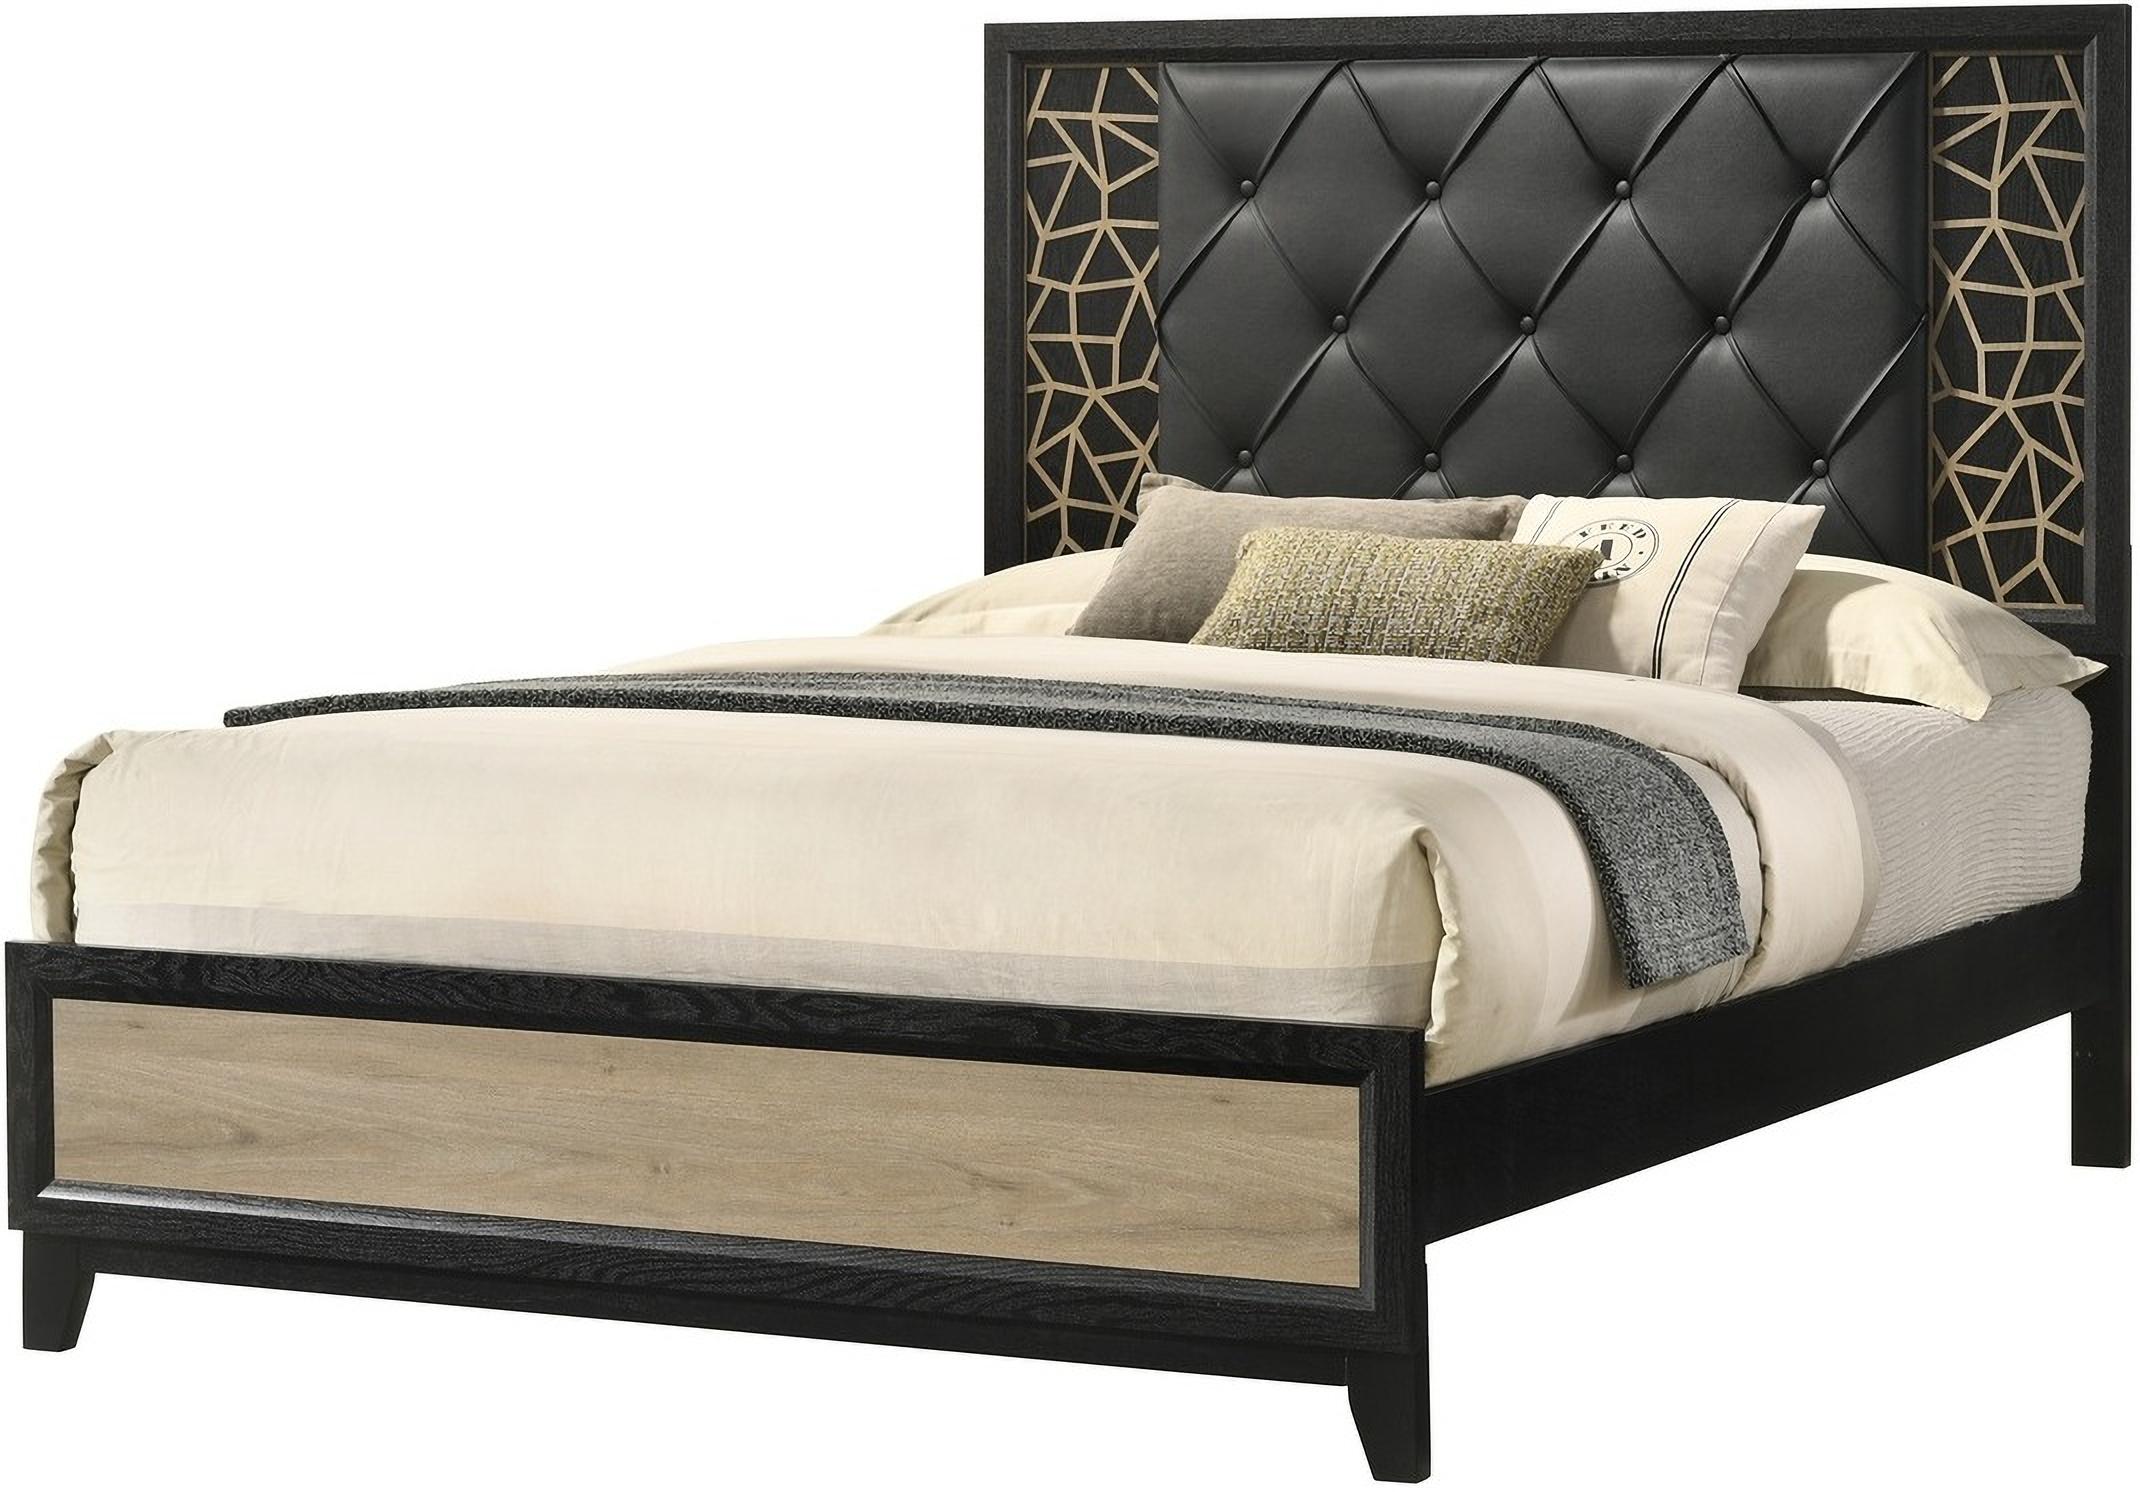 

    
Upholstered Queen Bed with Wooden Pattern In Black Selena Galaxy Home Contemporary
